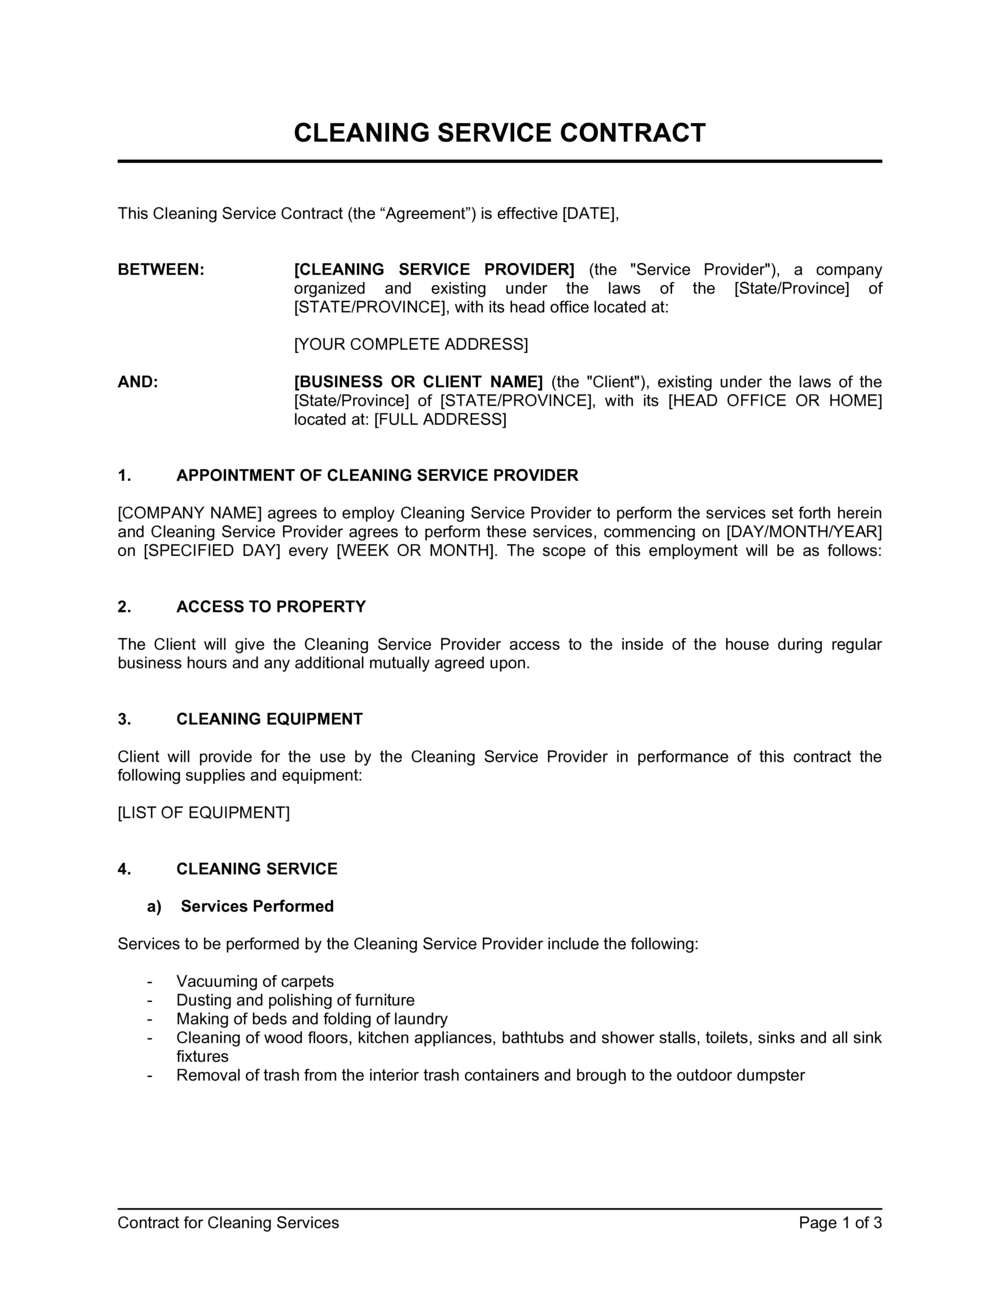 Commercial Cleaning Service Agreement Template